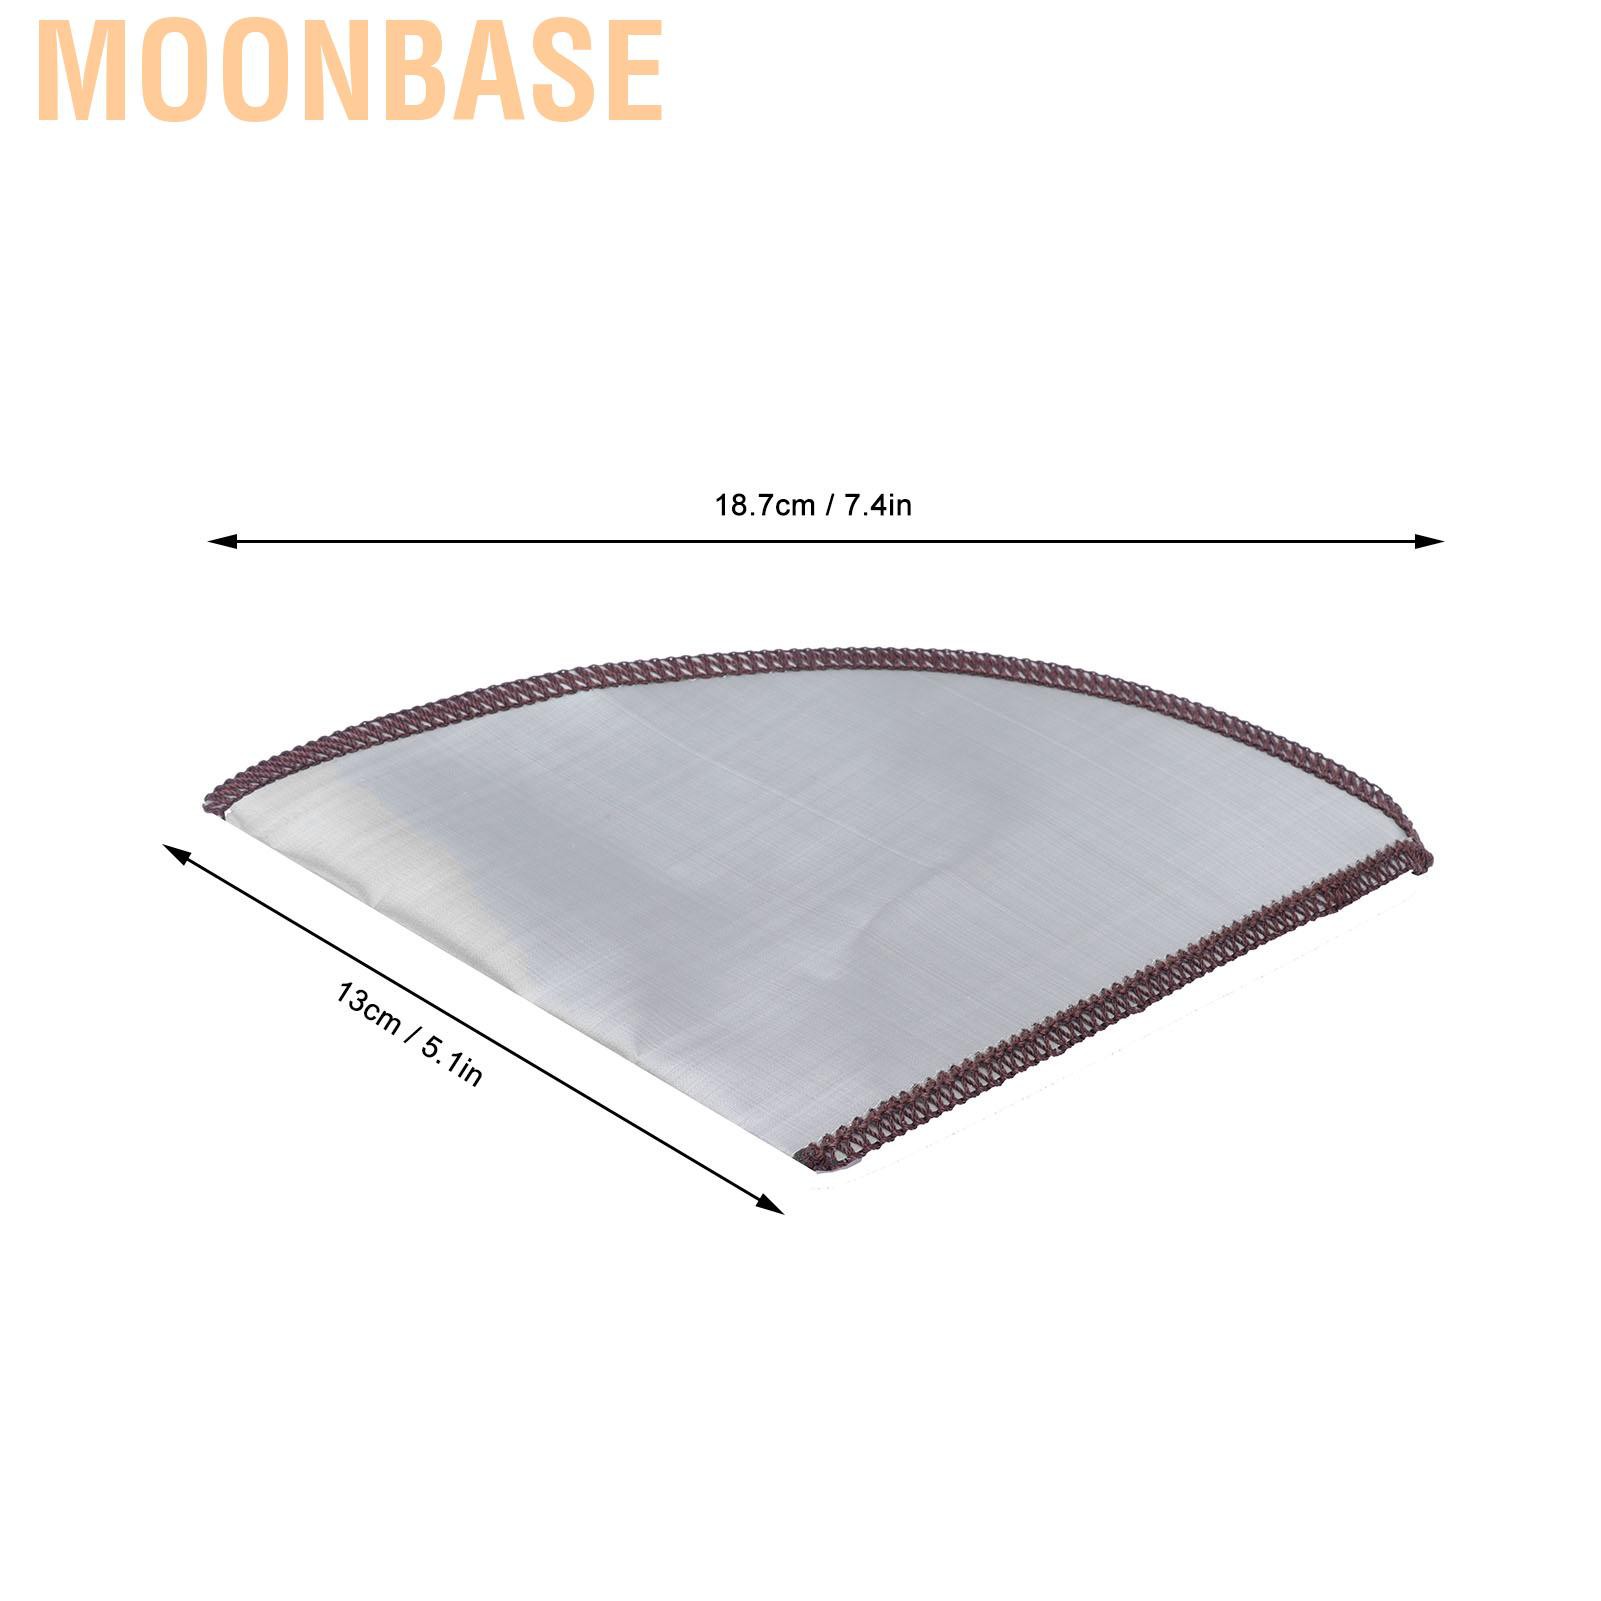 Moonbase Stainless Steel Coffee Filter Reusable Foldable Cone Strainer Bag 2-4 Cup